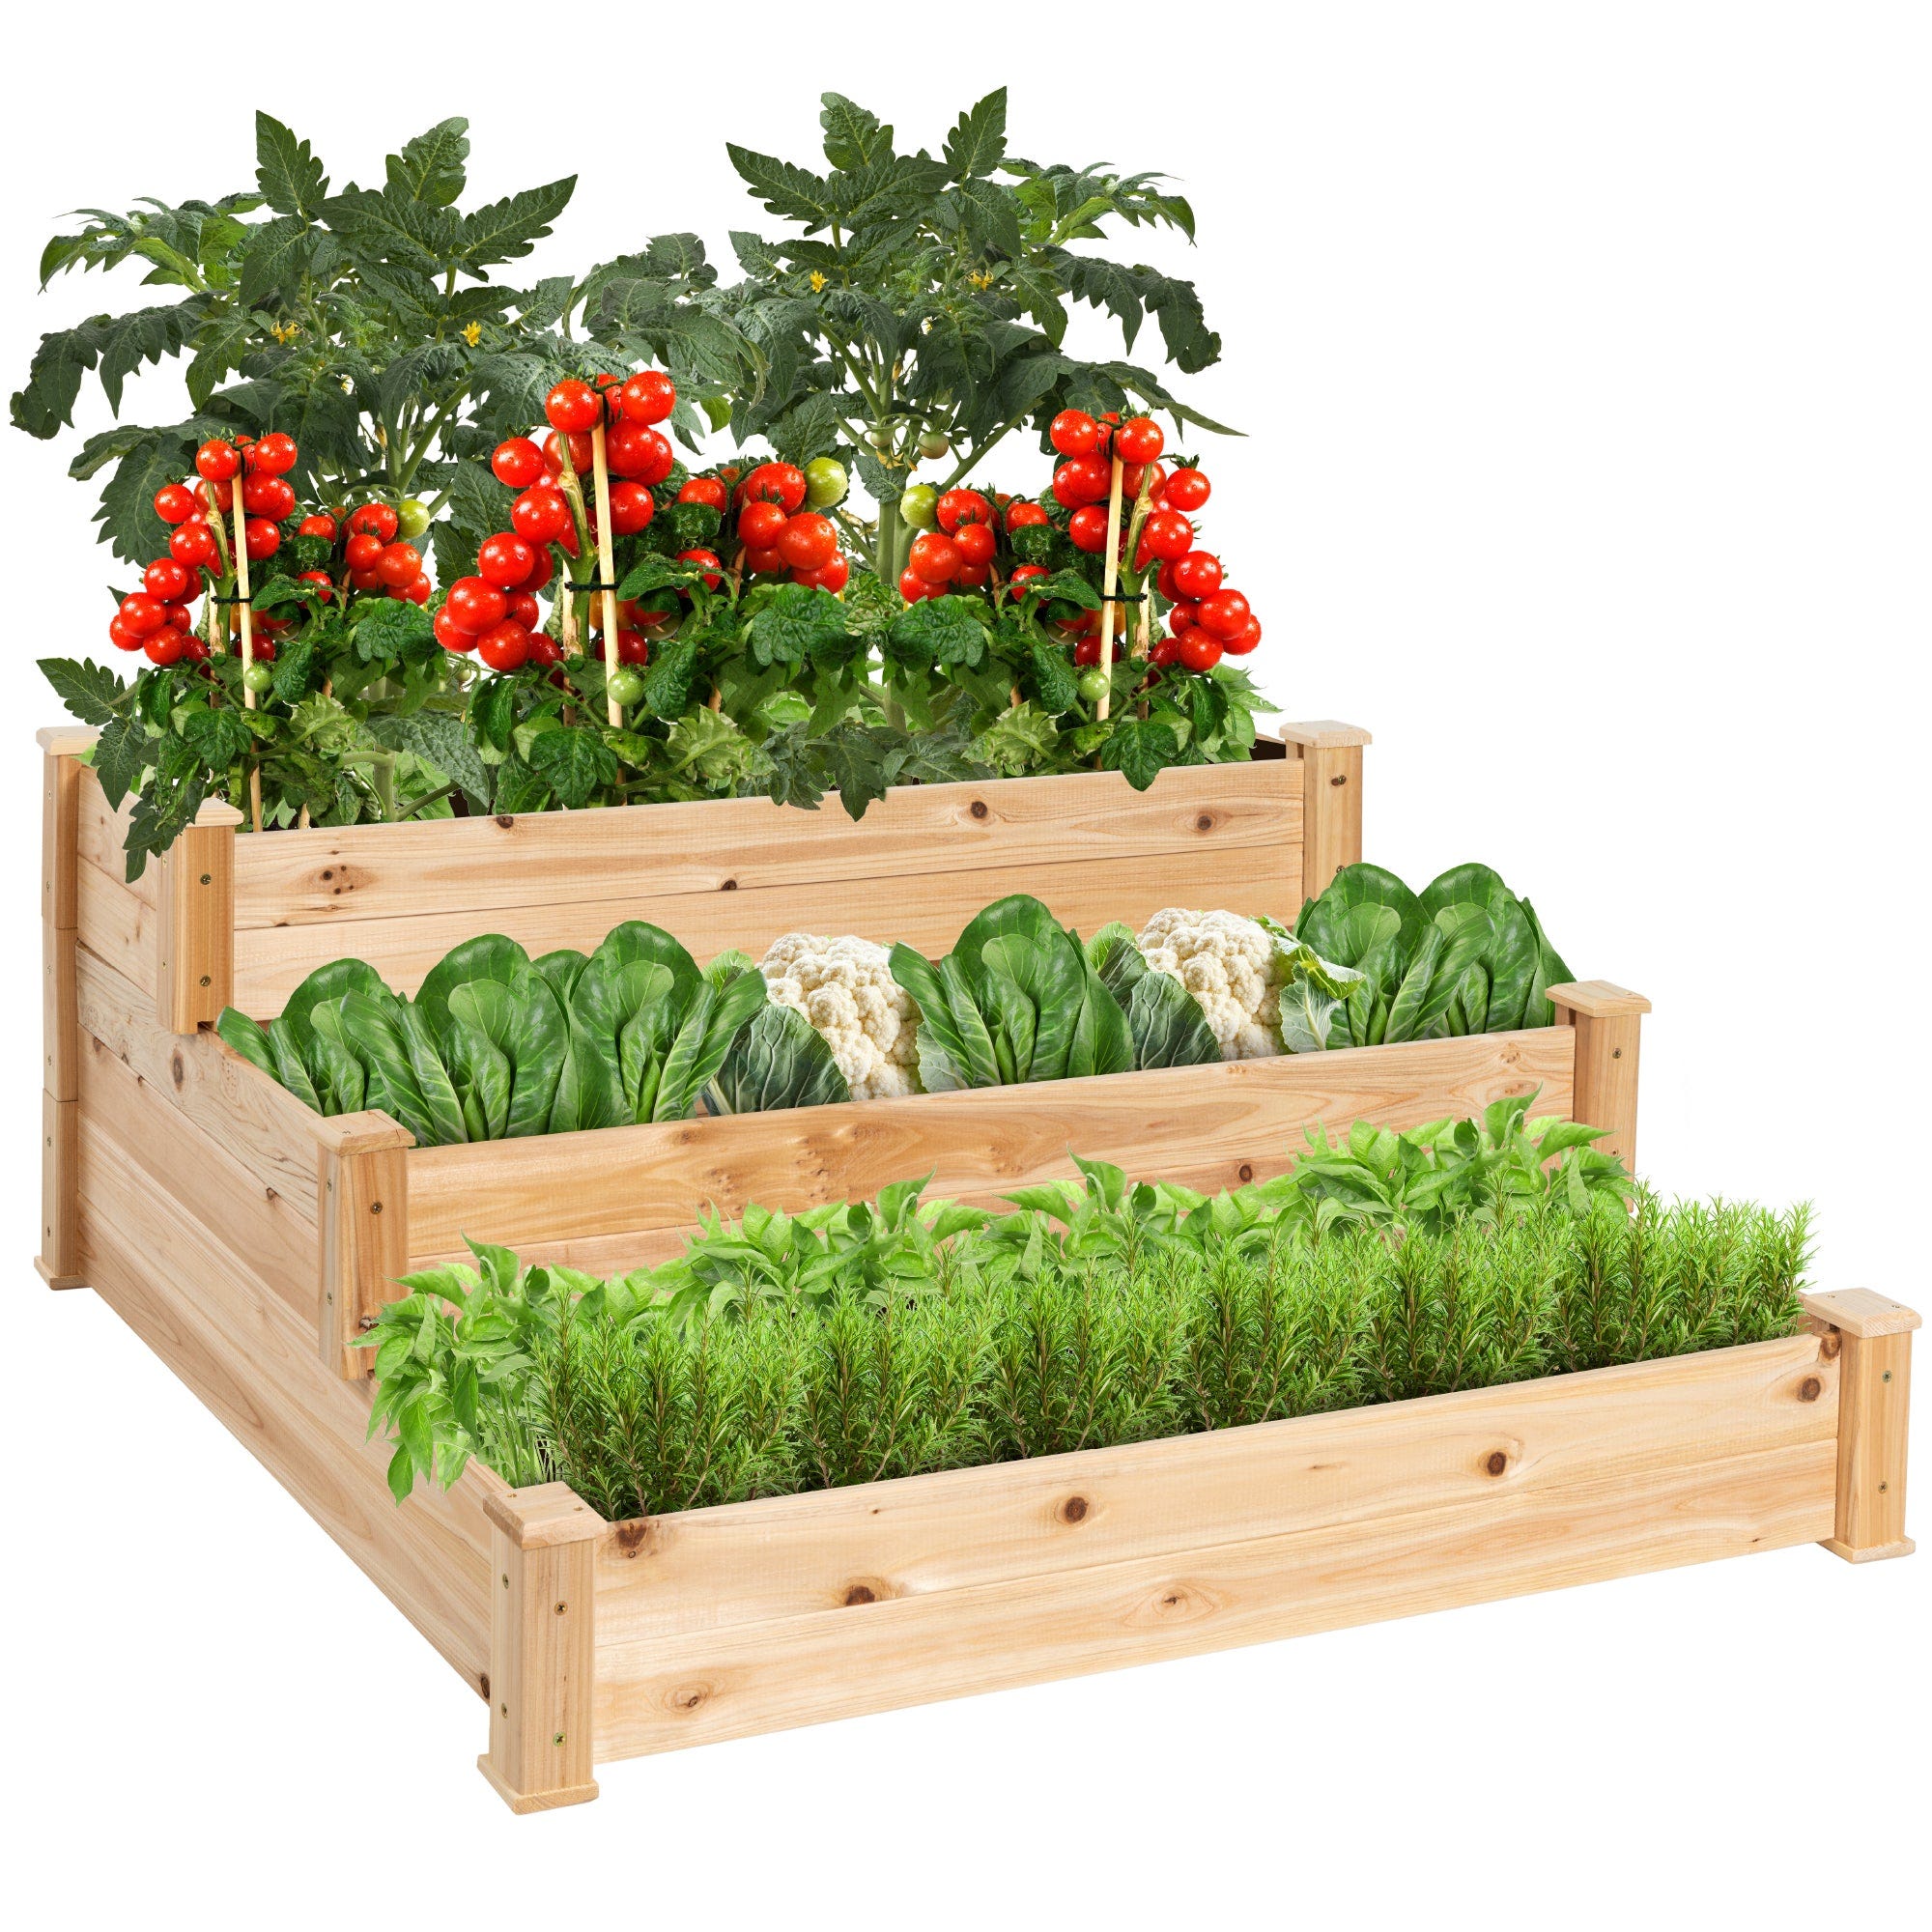 A 3-tier wooden garden bed with tomatoes on the top tier, followed by lettuce and cauliflower, and herbs on the lowest tier.